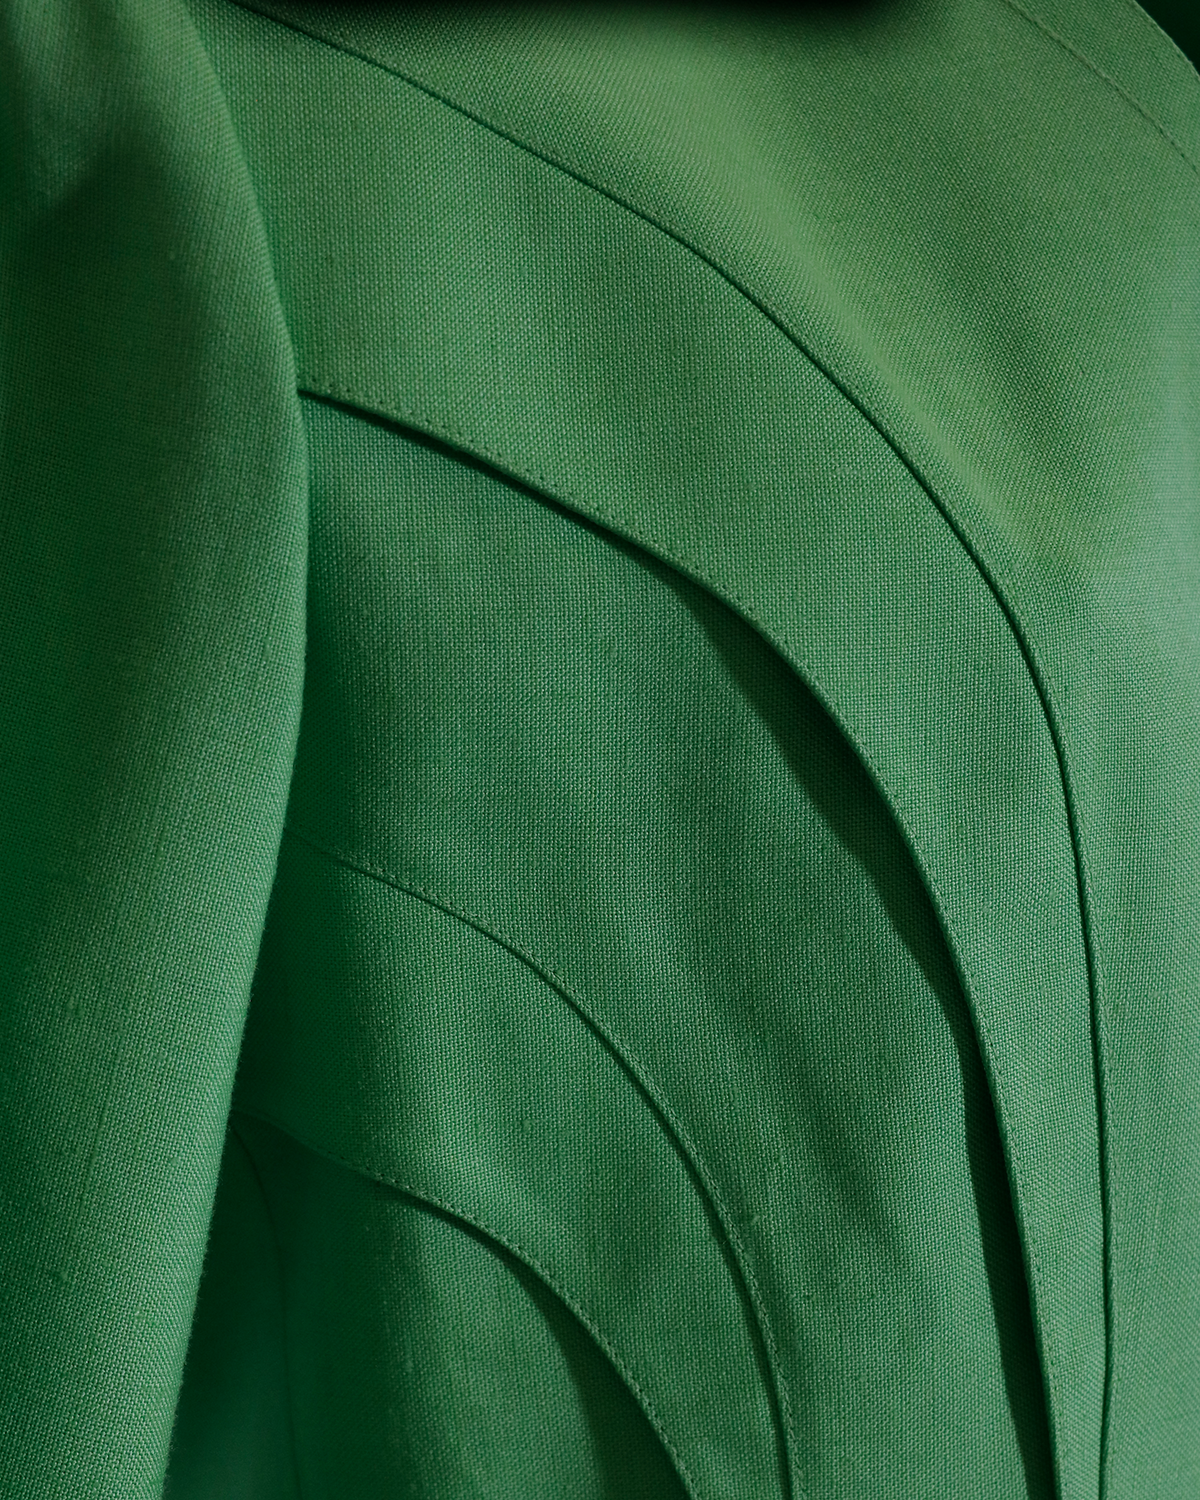 Thierry Mugler Green Suit from 1990s